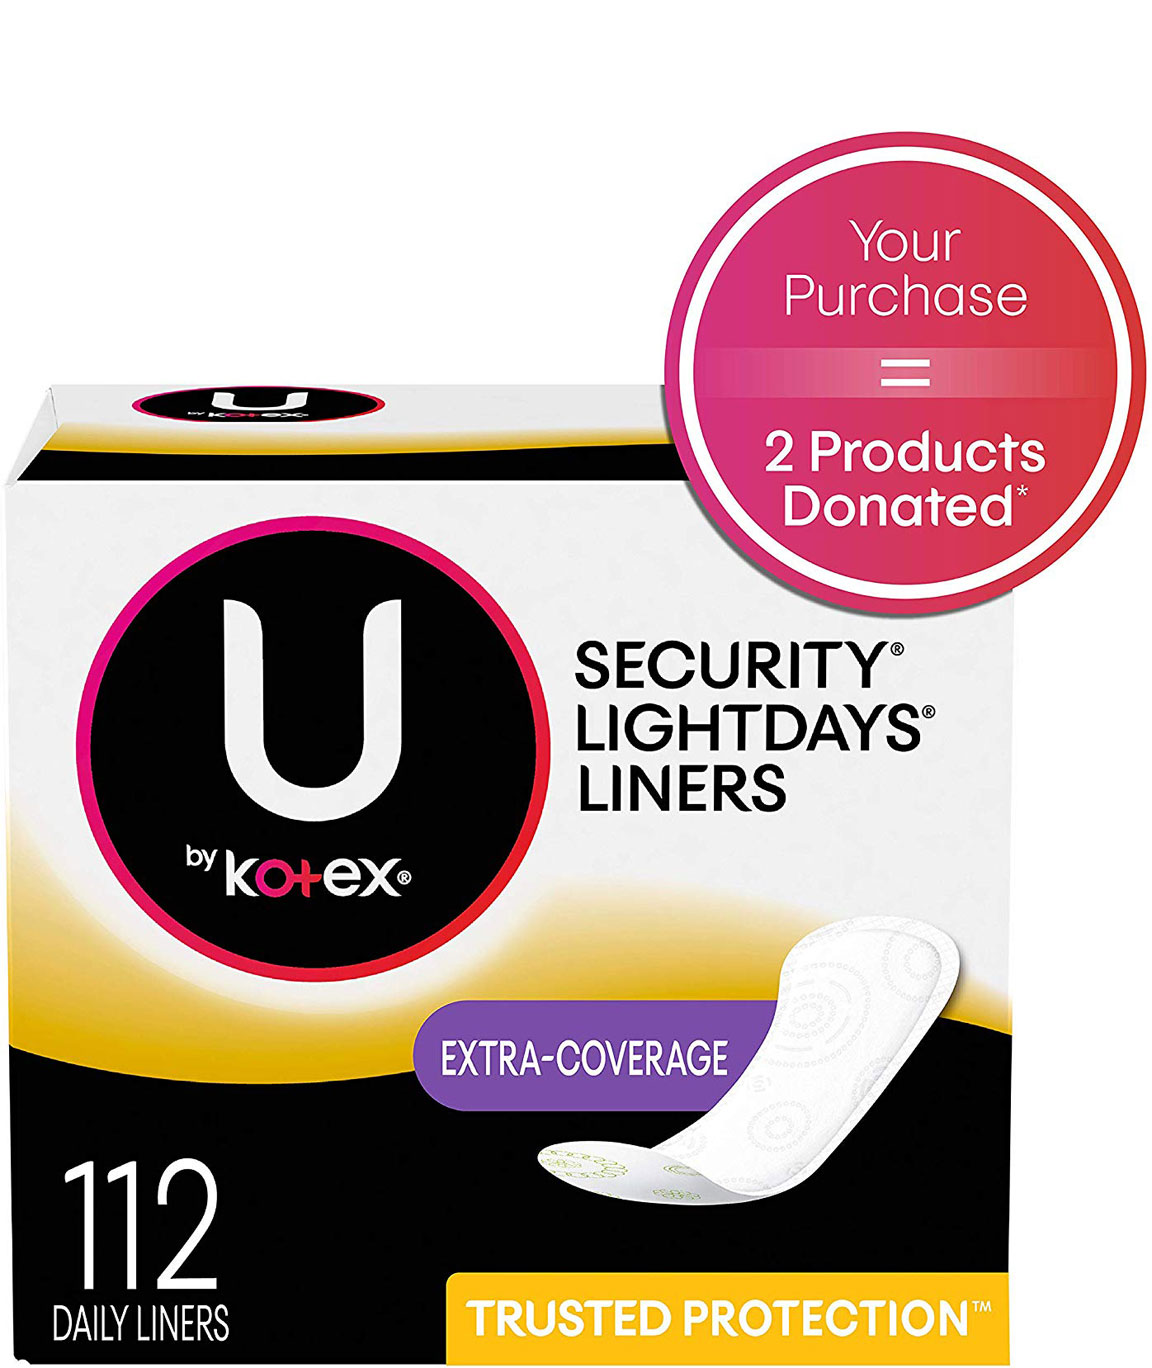 U by Kotex Lightdays Liners Extra Coverage Unscented Jumbo Pack 112 Count